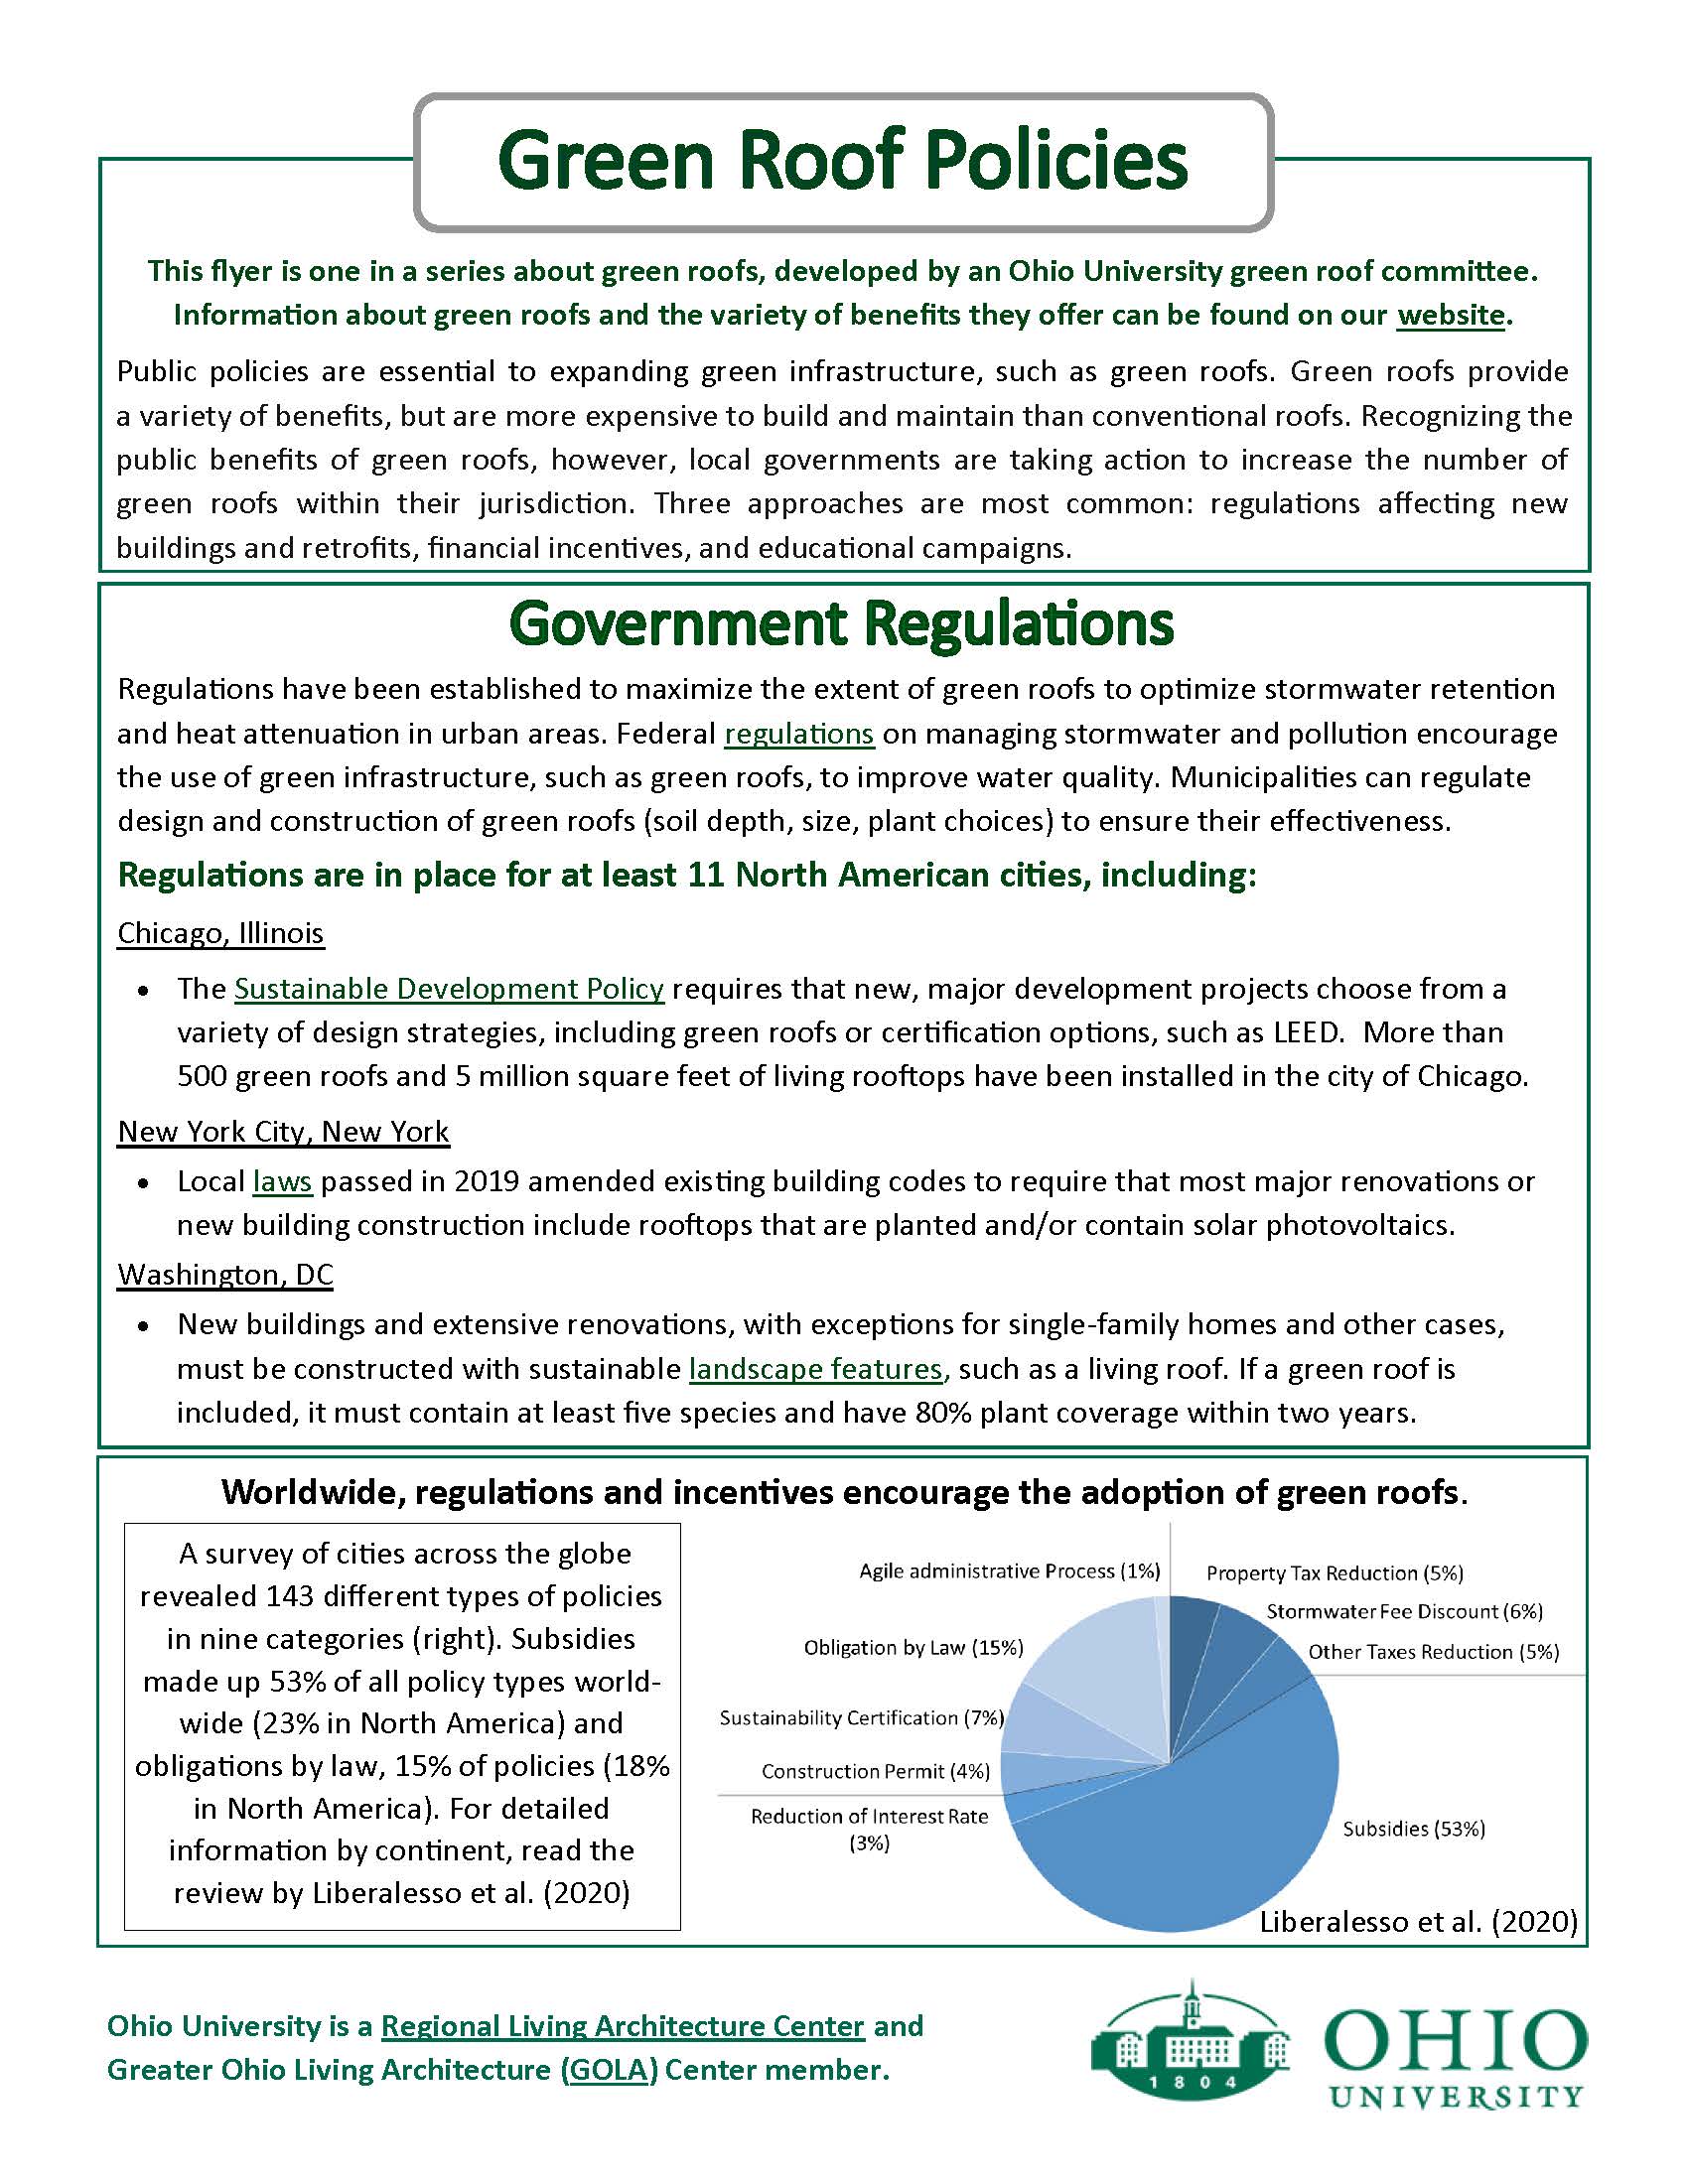 An image of a flyer on green roof policies page 1